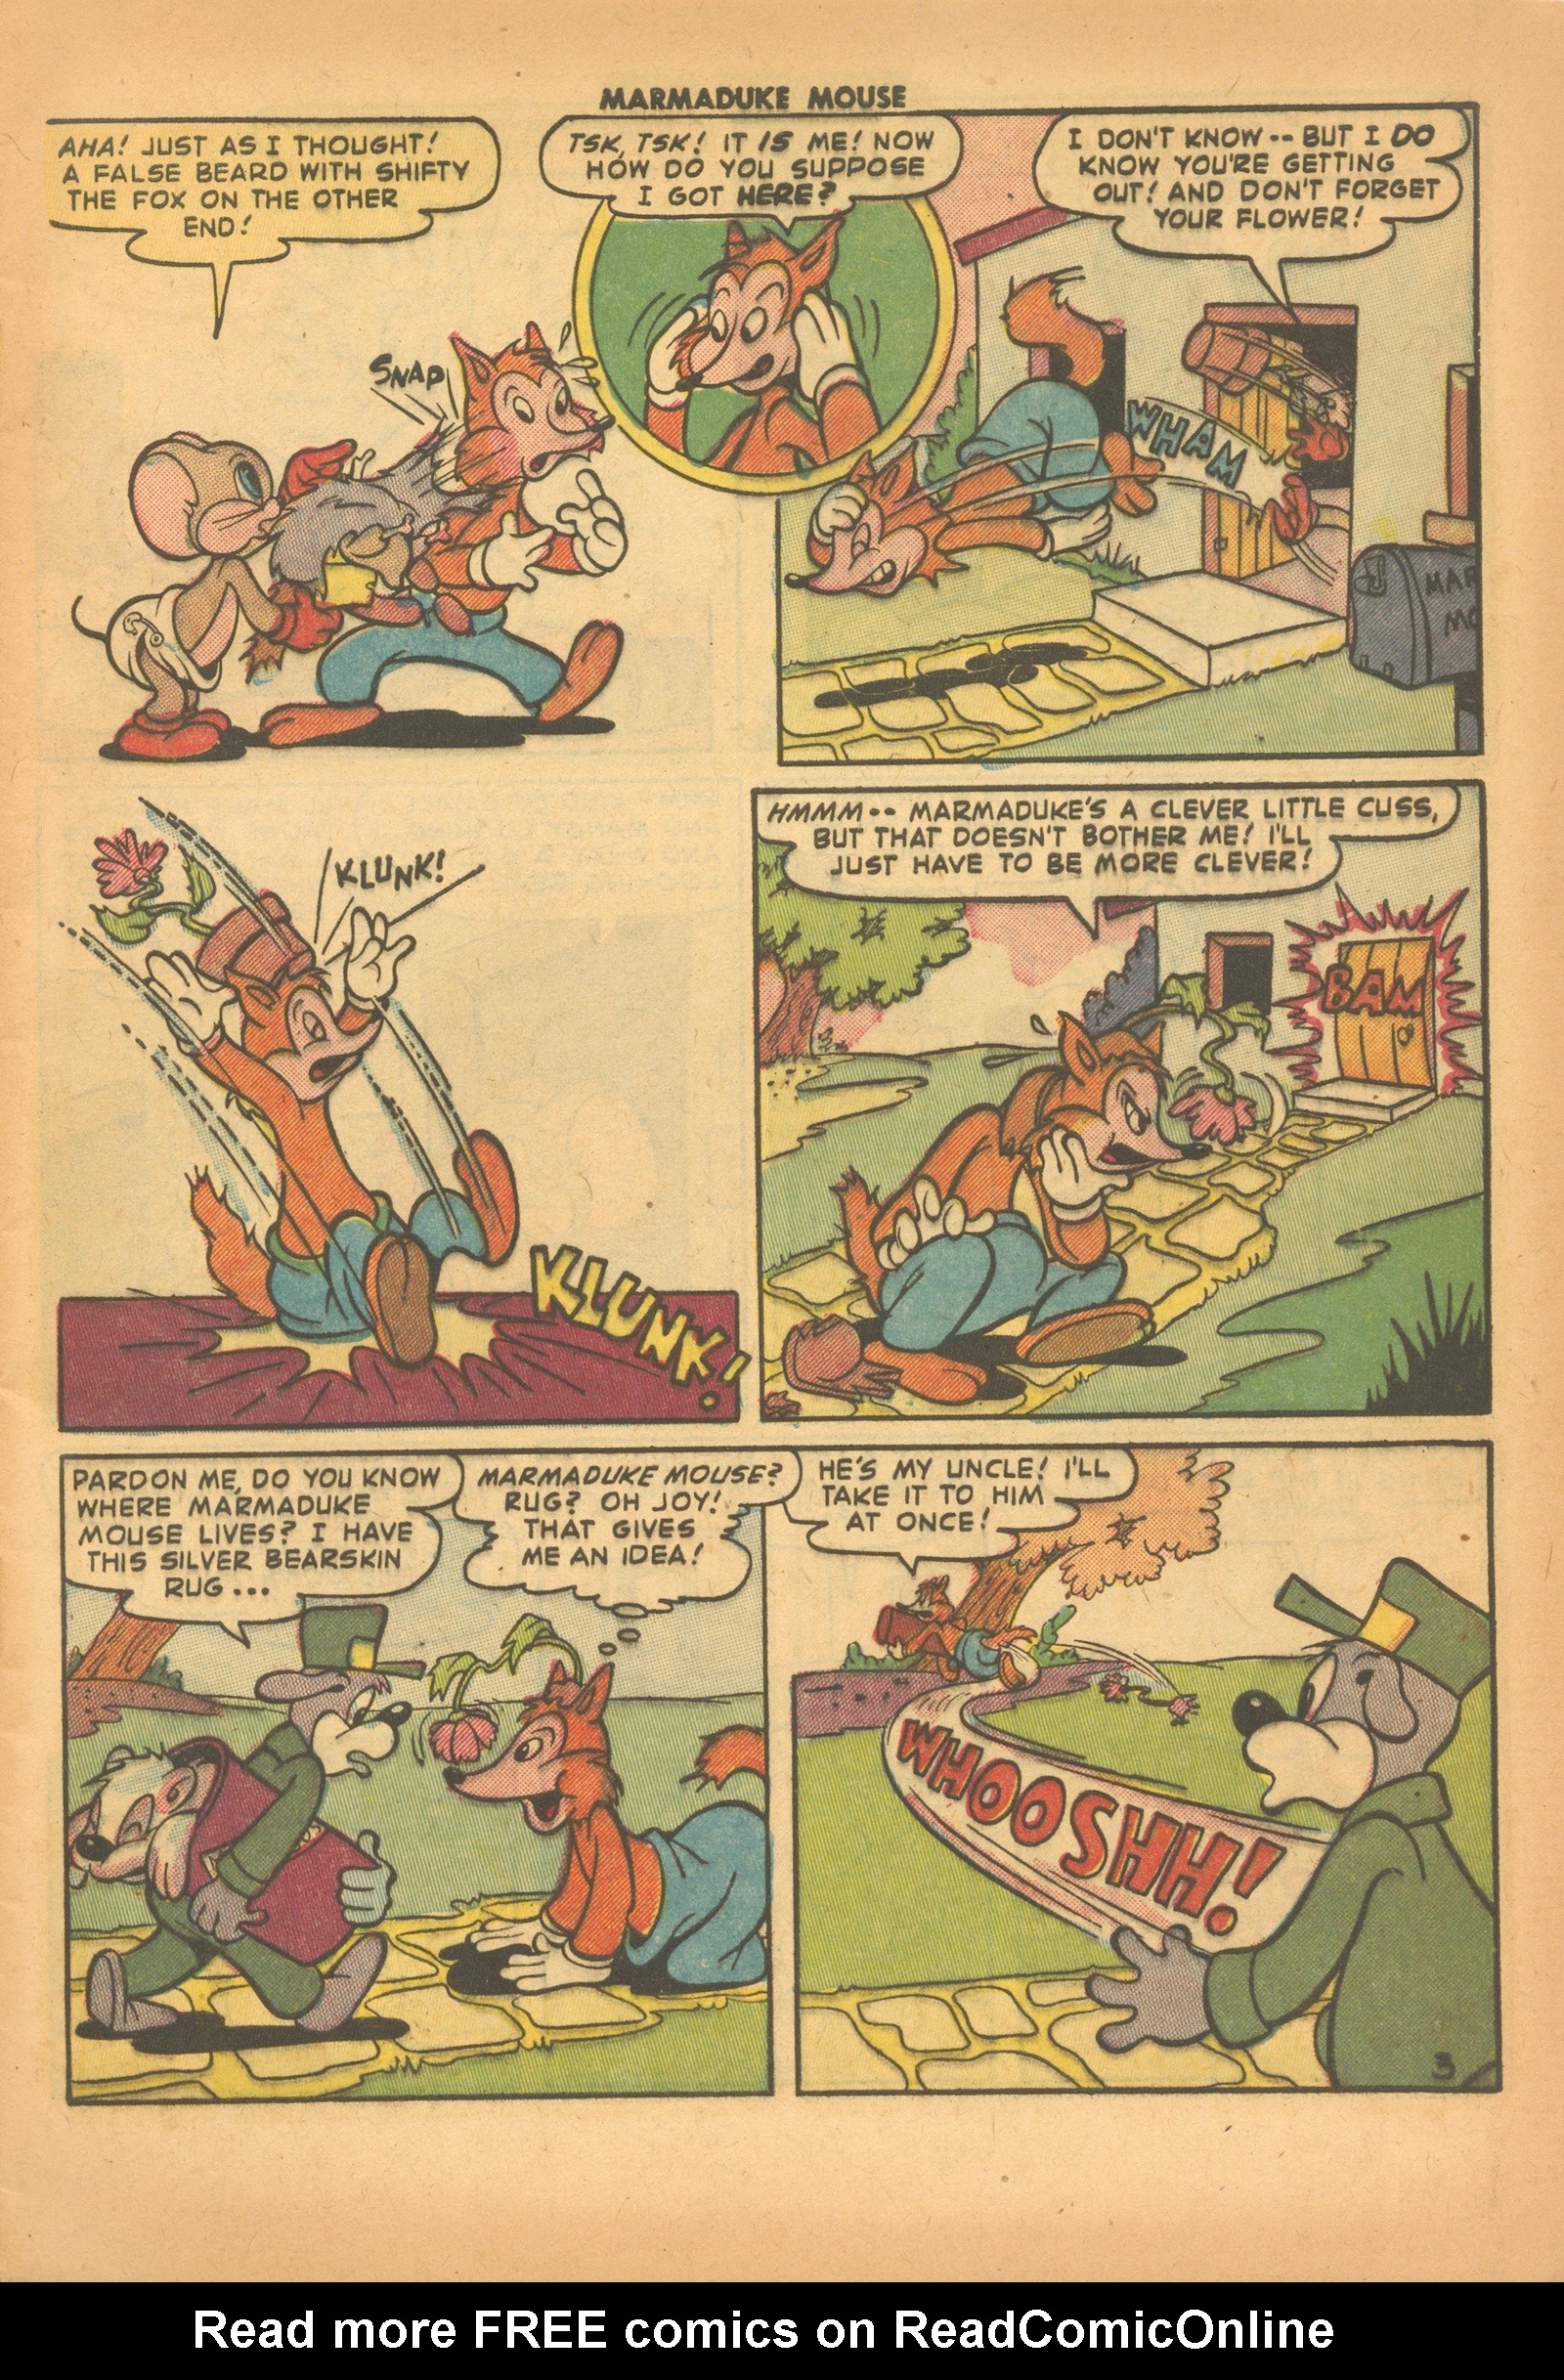 Read online Marmaduke Mouse comic -  Issue #36 - 5